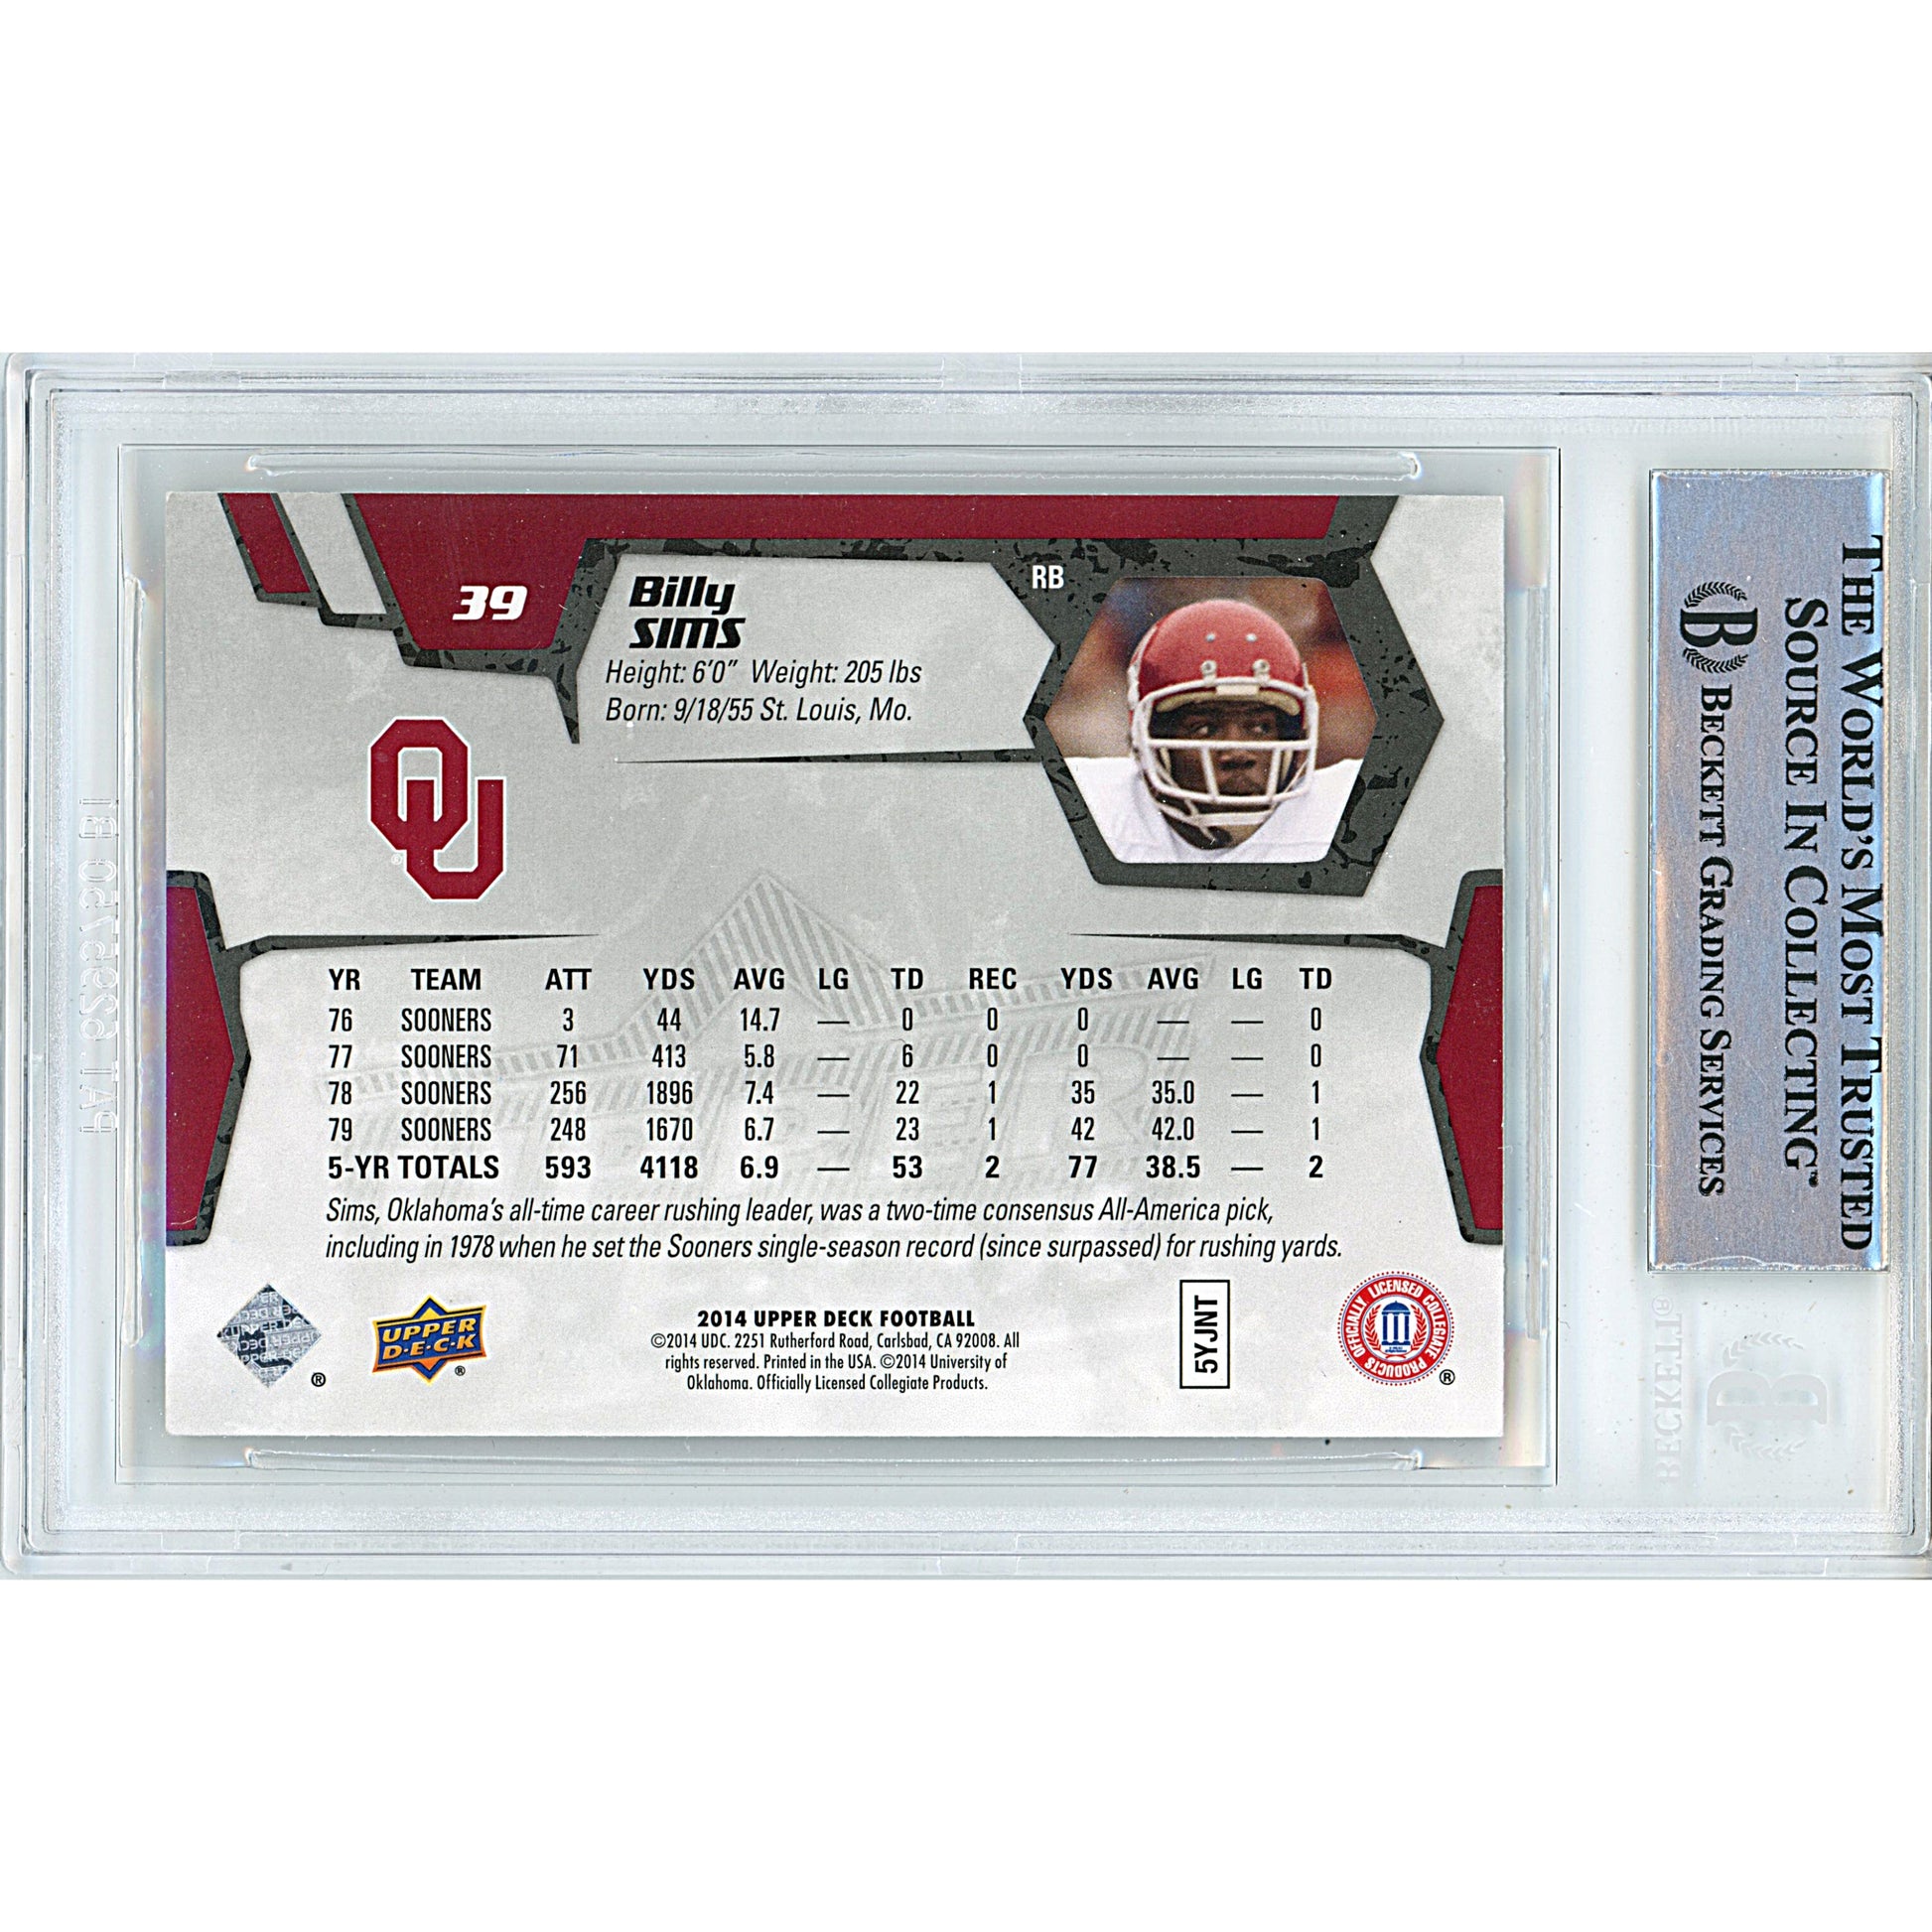 Football- Autographed- Billy Sims Signed Oklahoma Sooners 2014 Upper Deck Football Card Beckett Authentication Slabbed 00014998073 - 102